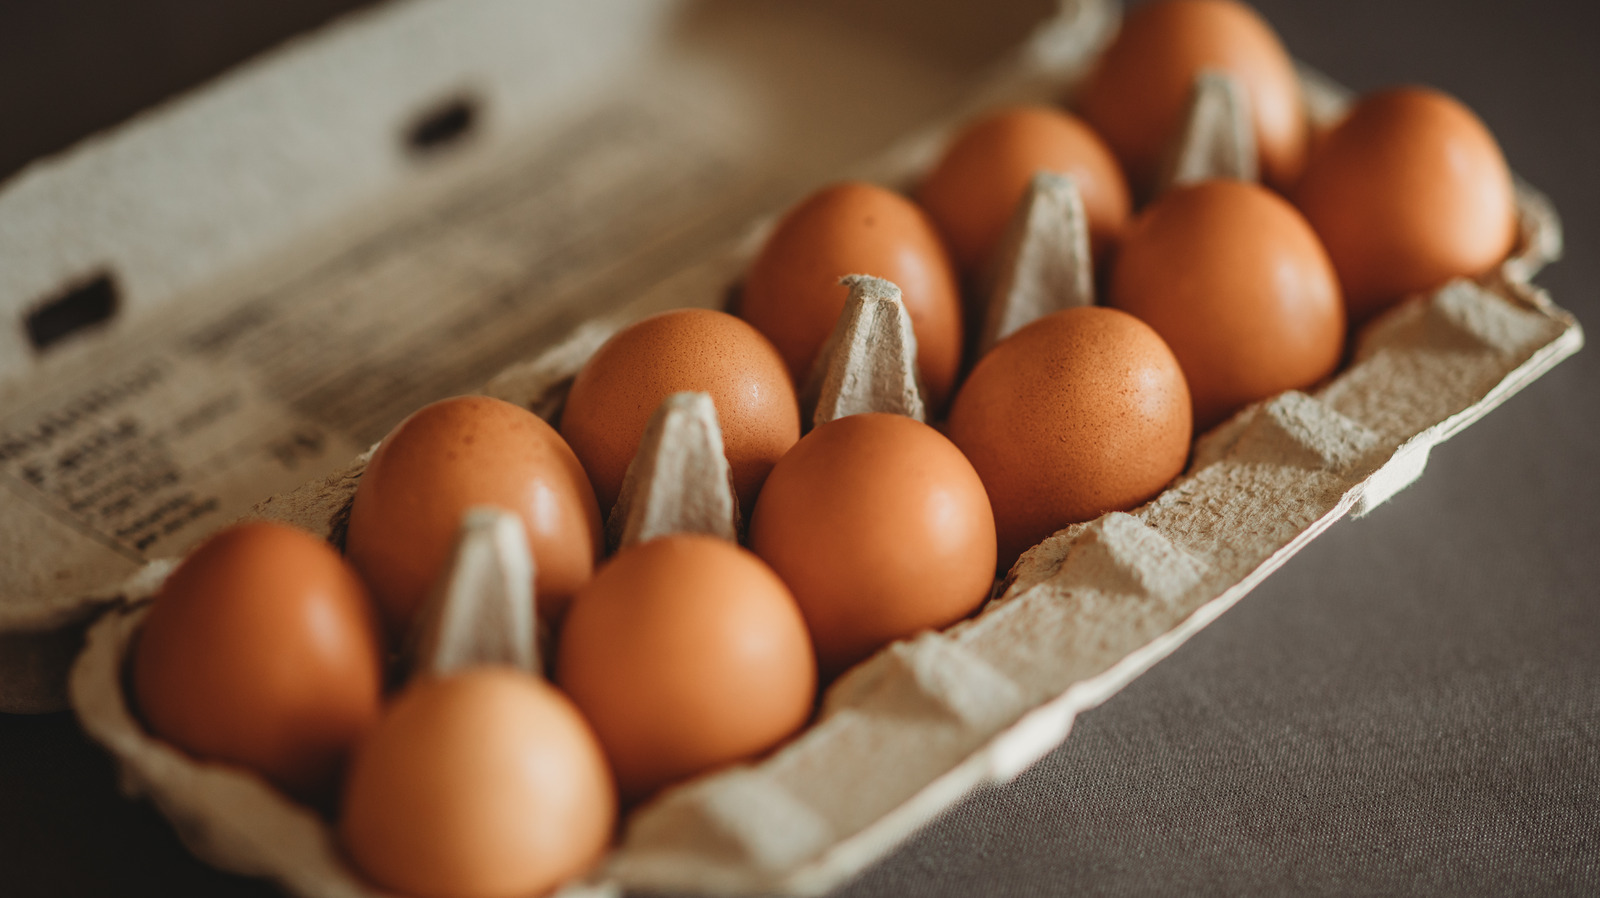 How Colorado's CageFree Egg Law Could Impact Prices